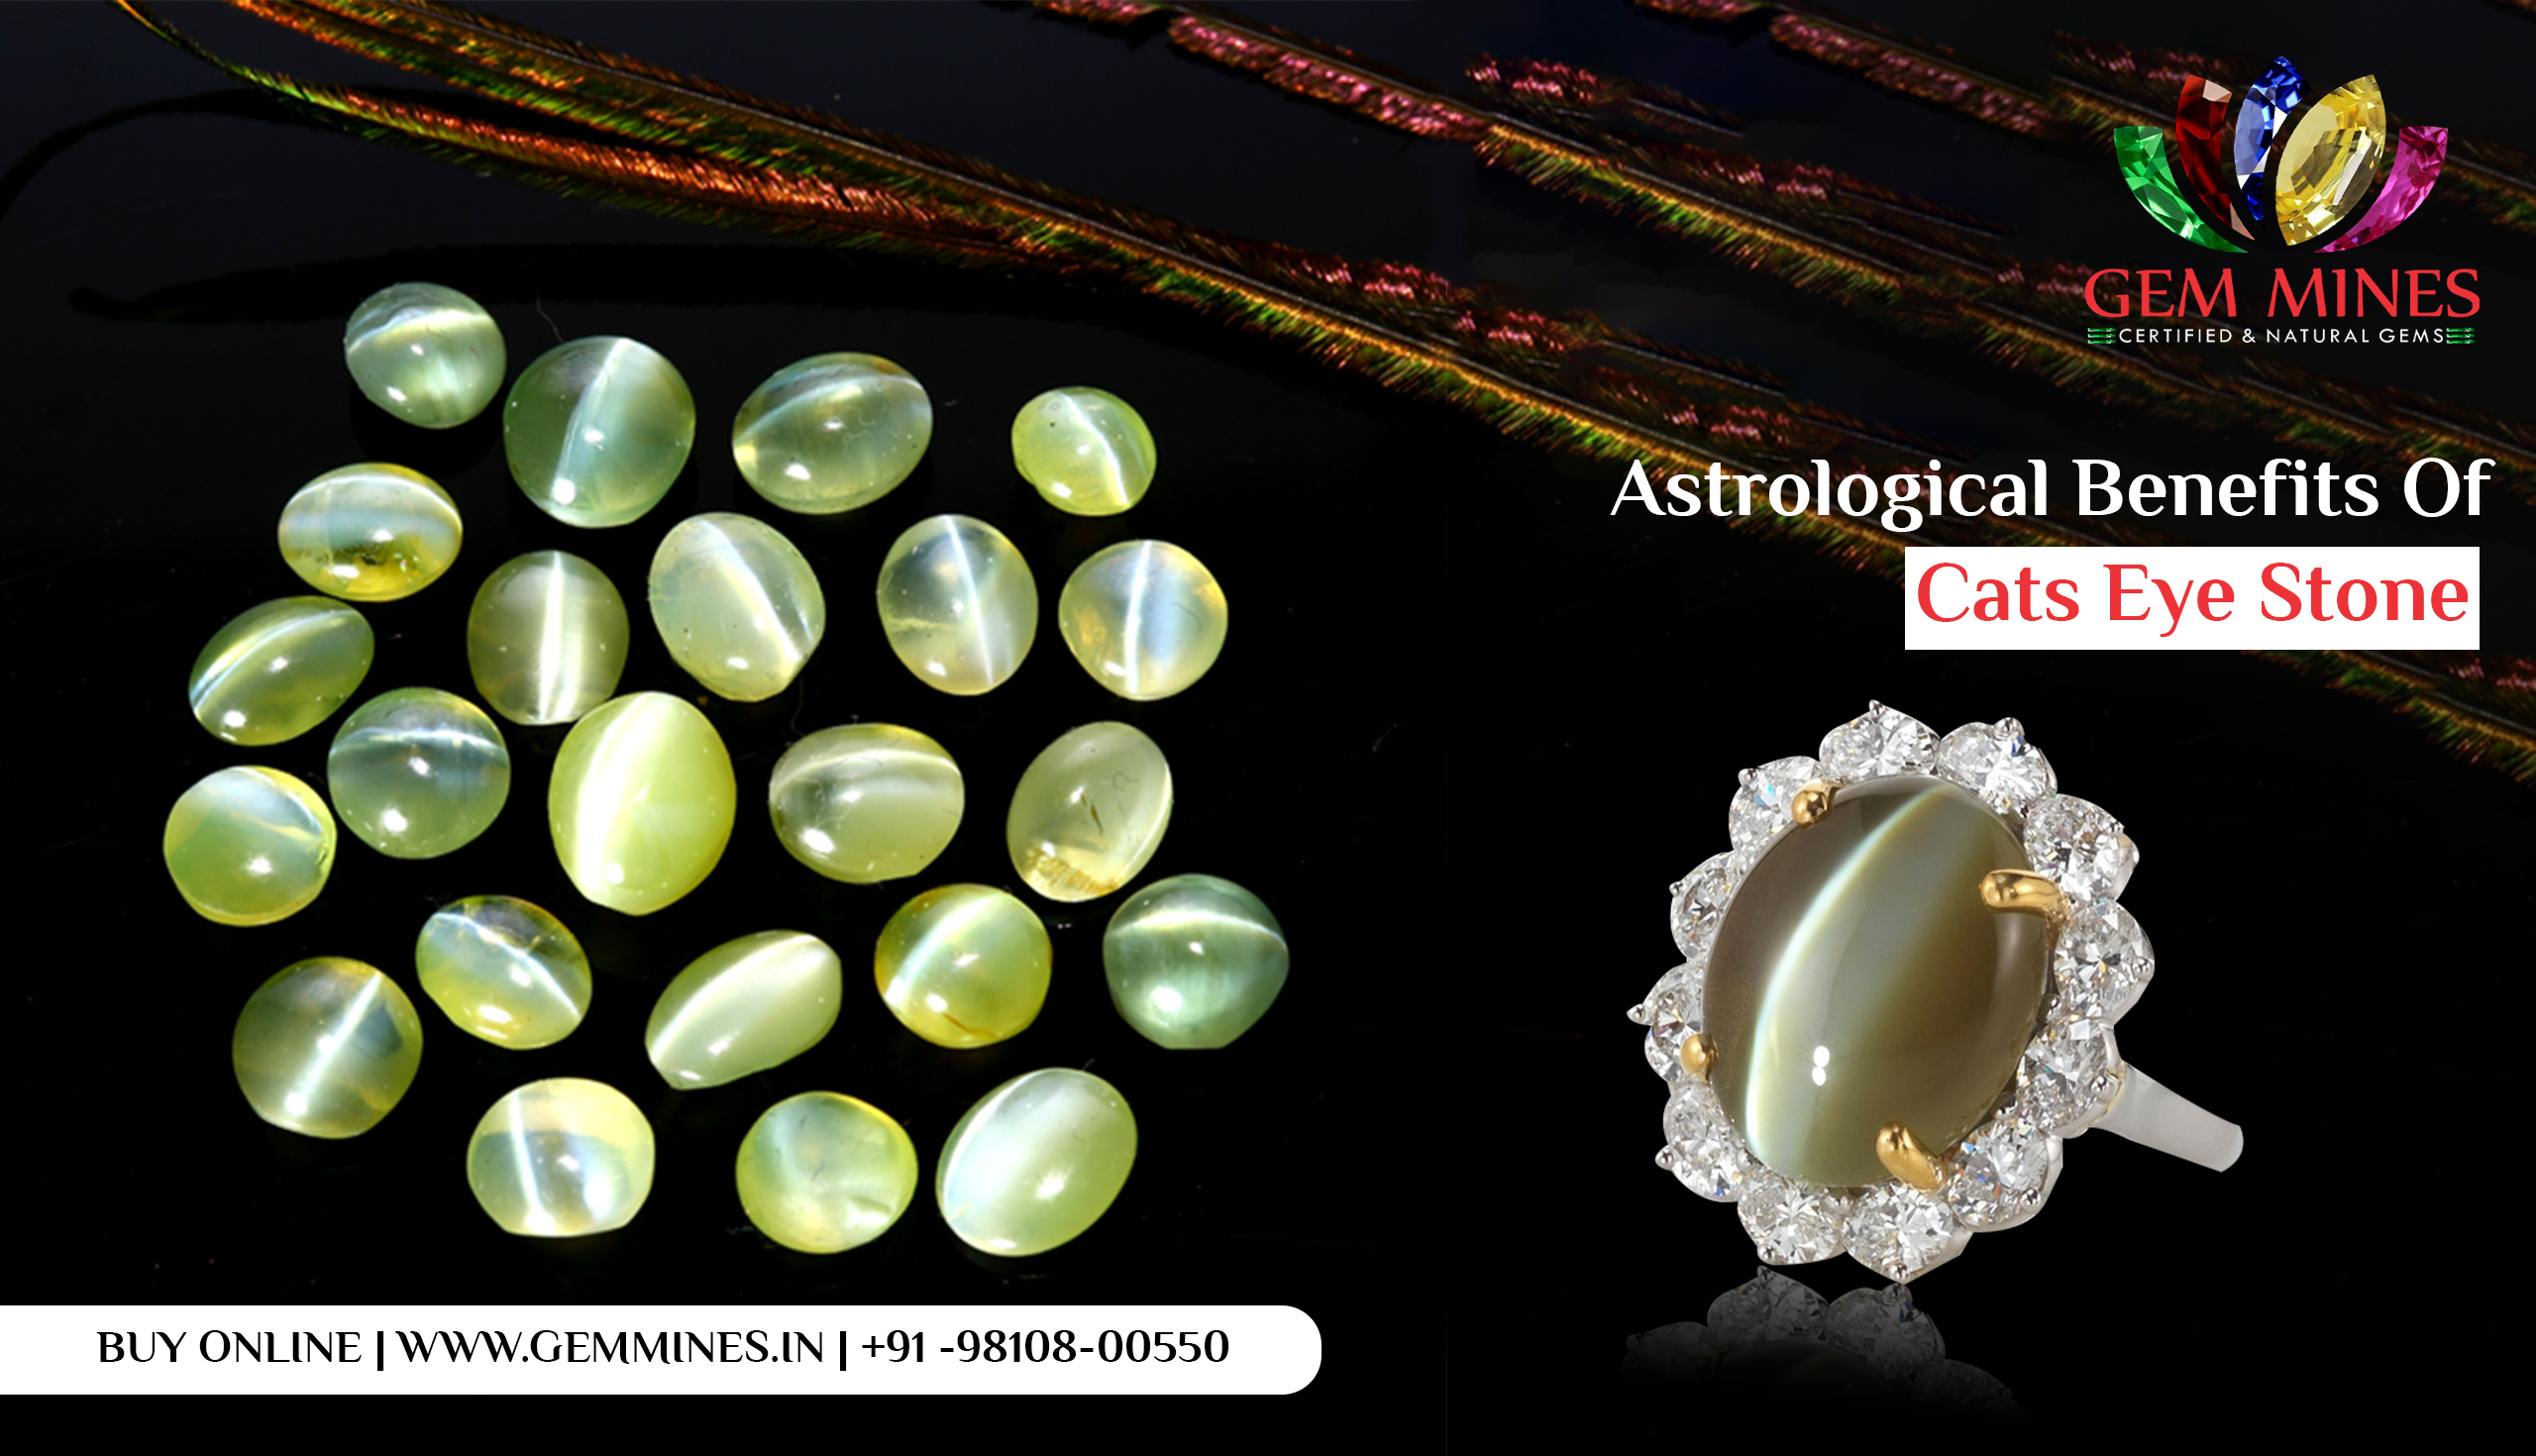 Astrological Benefits Of Cats Eye Stone